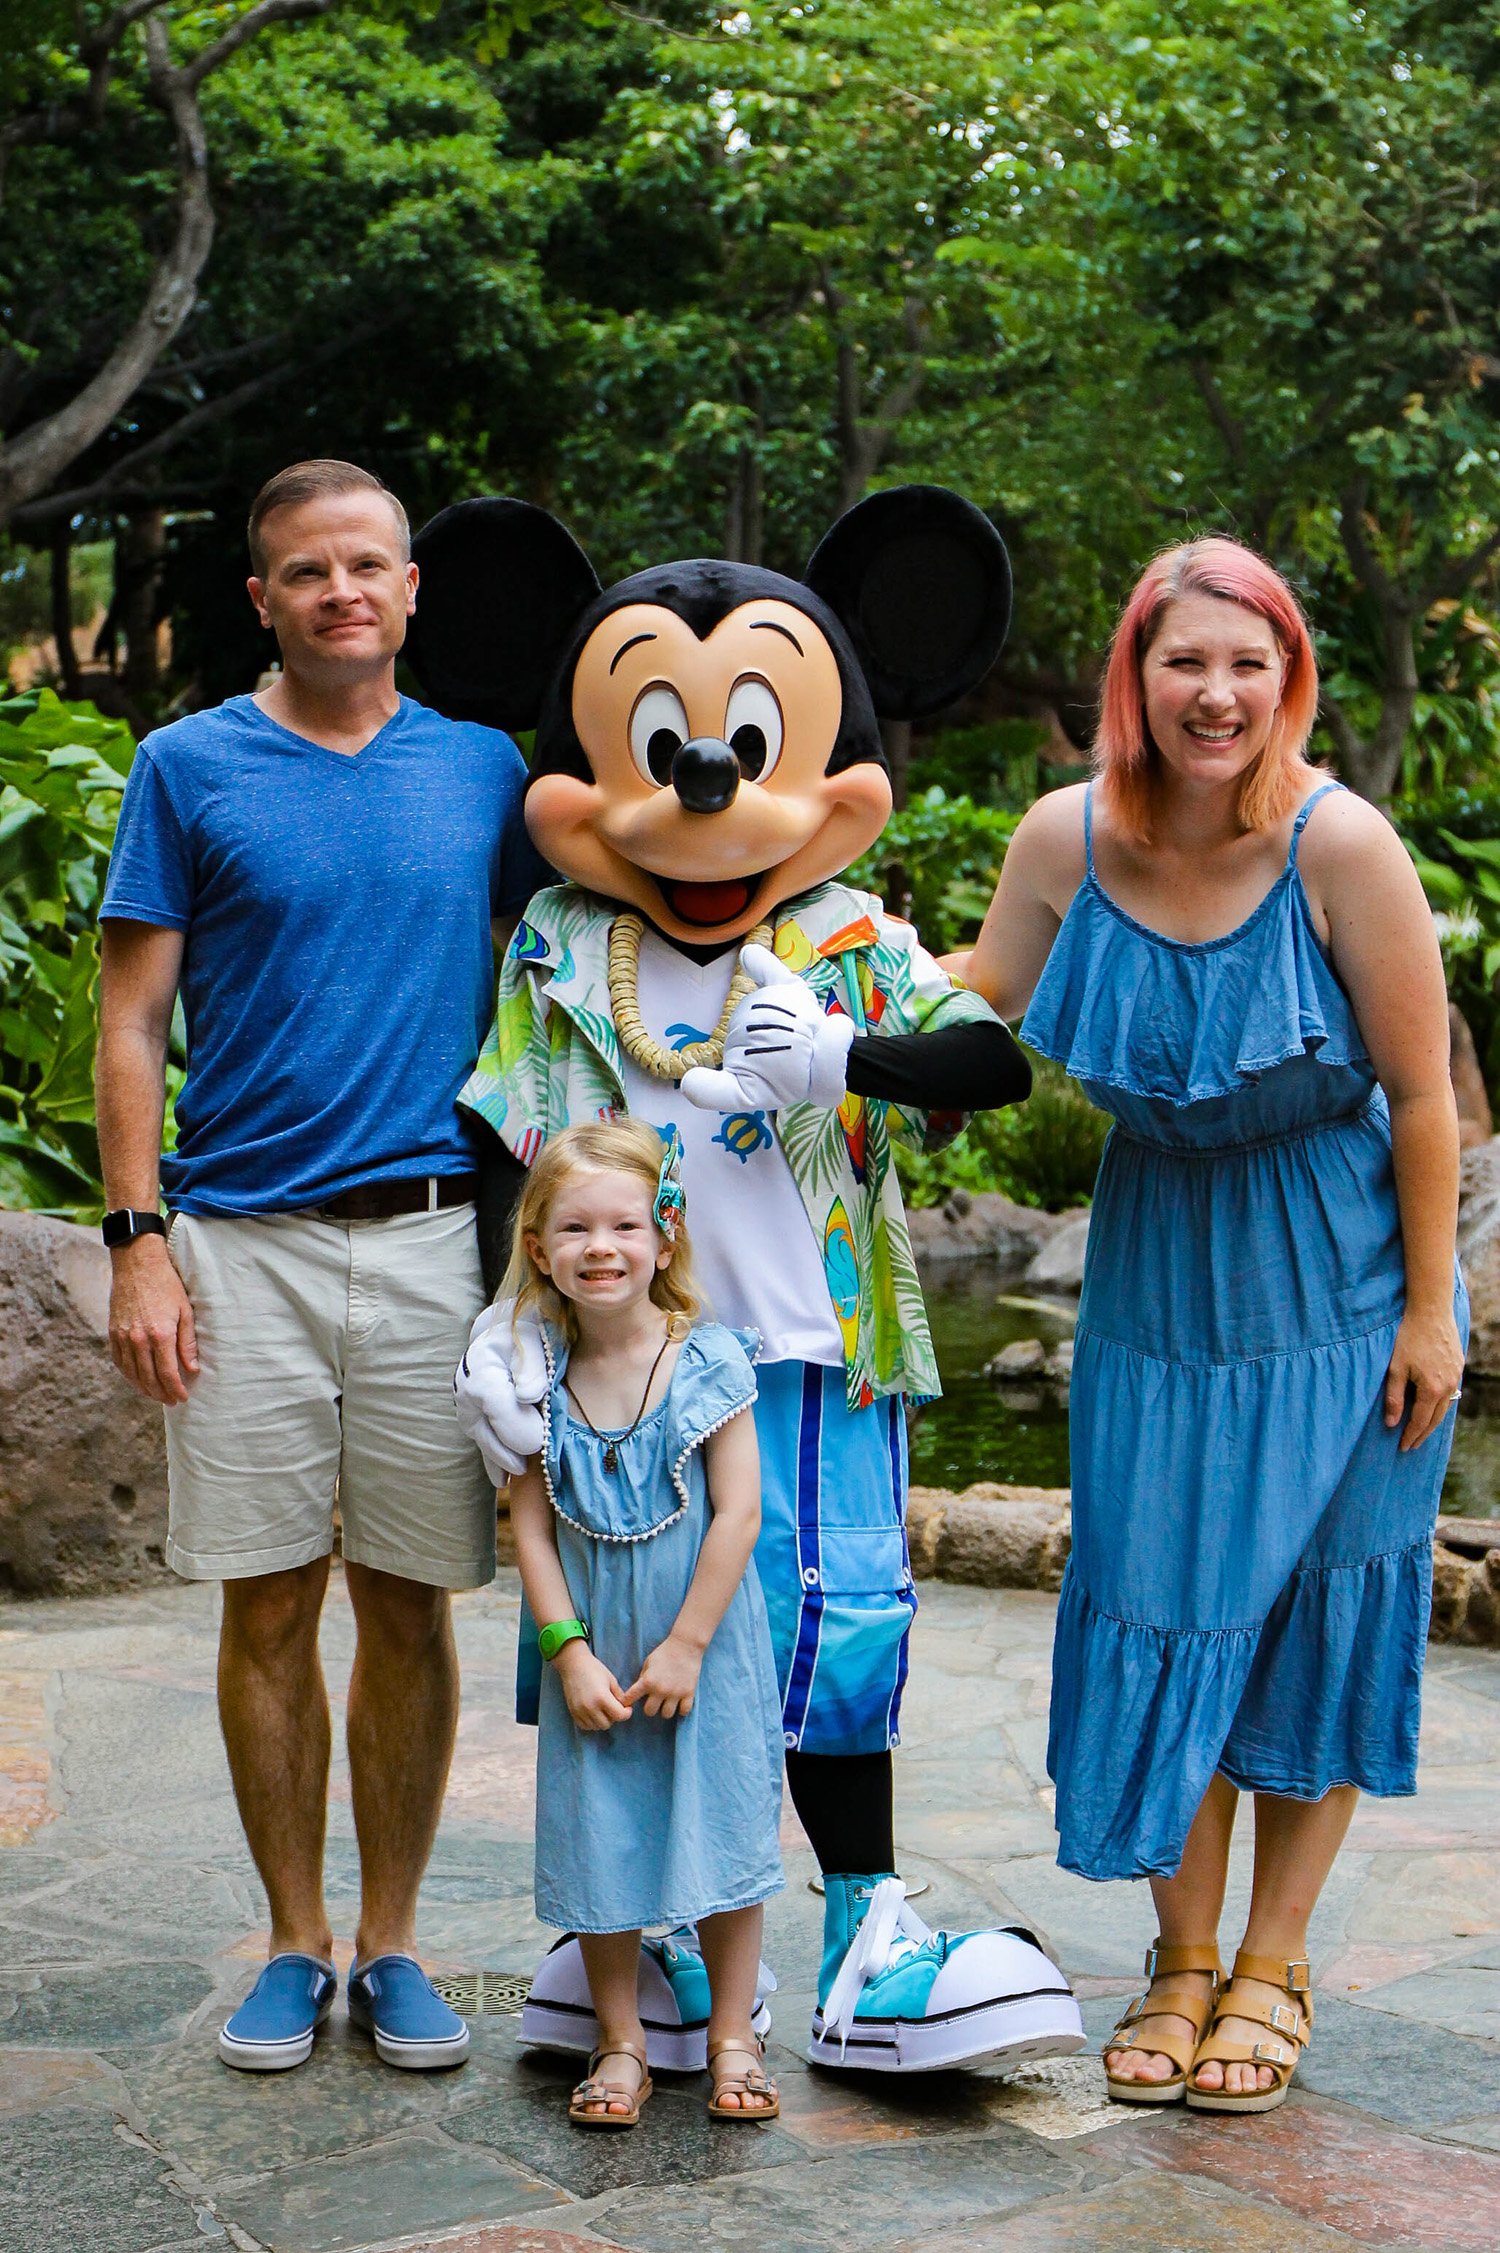 Mickey at Disney Aulani.....isn't his vacation outfit adorable?!?